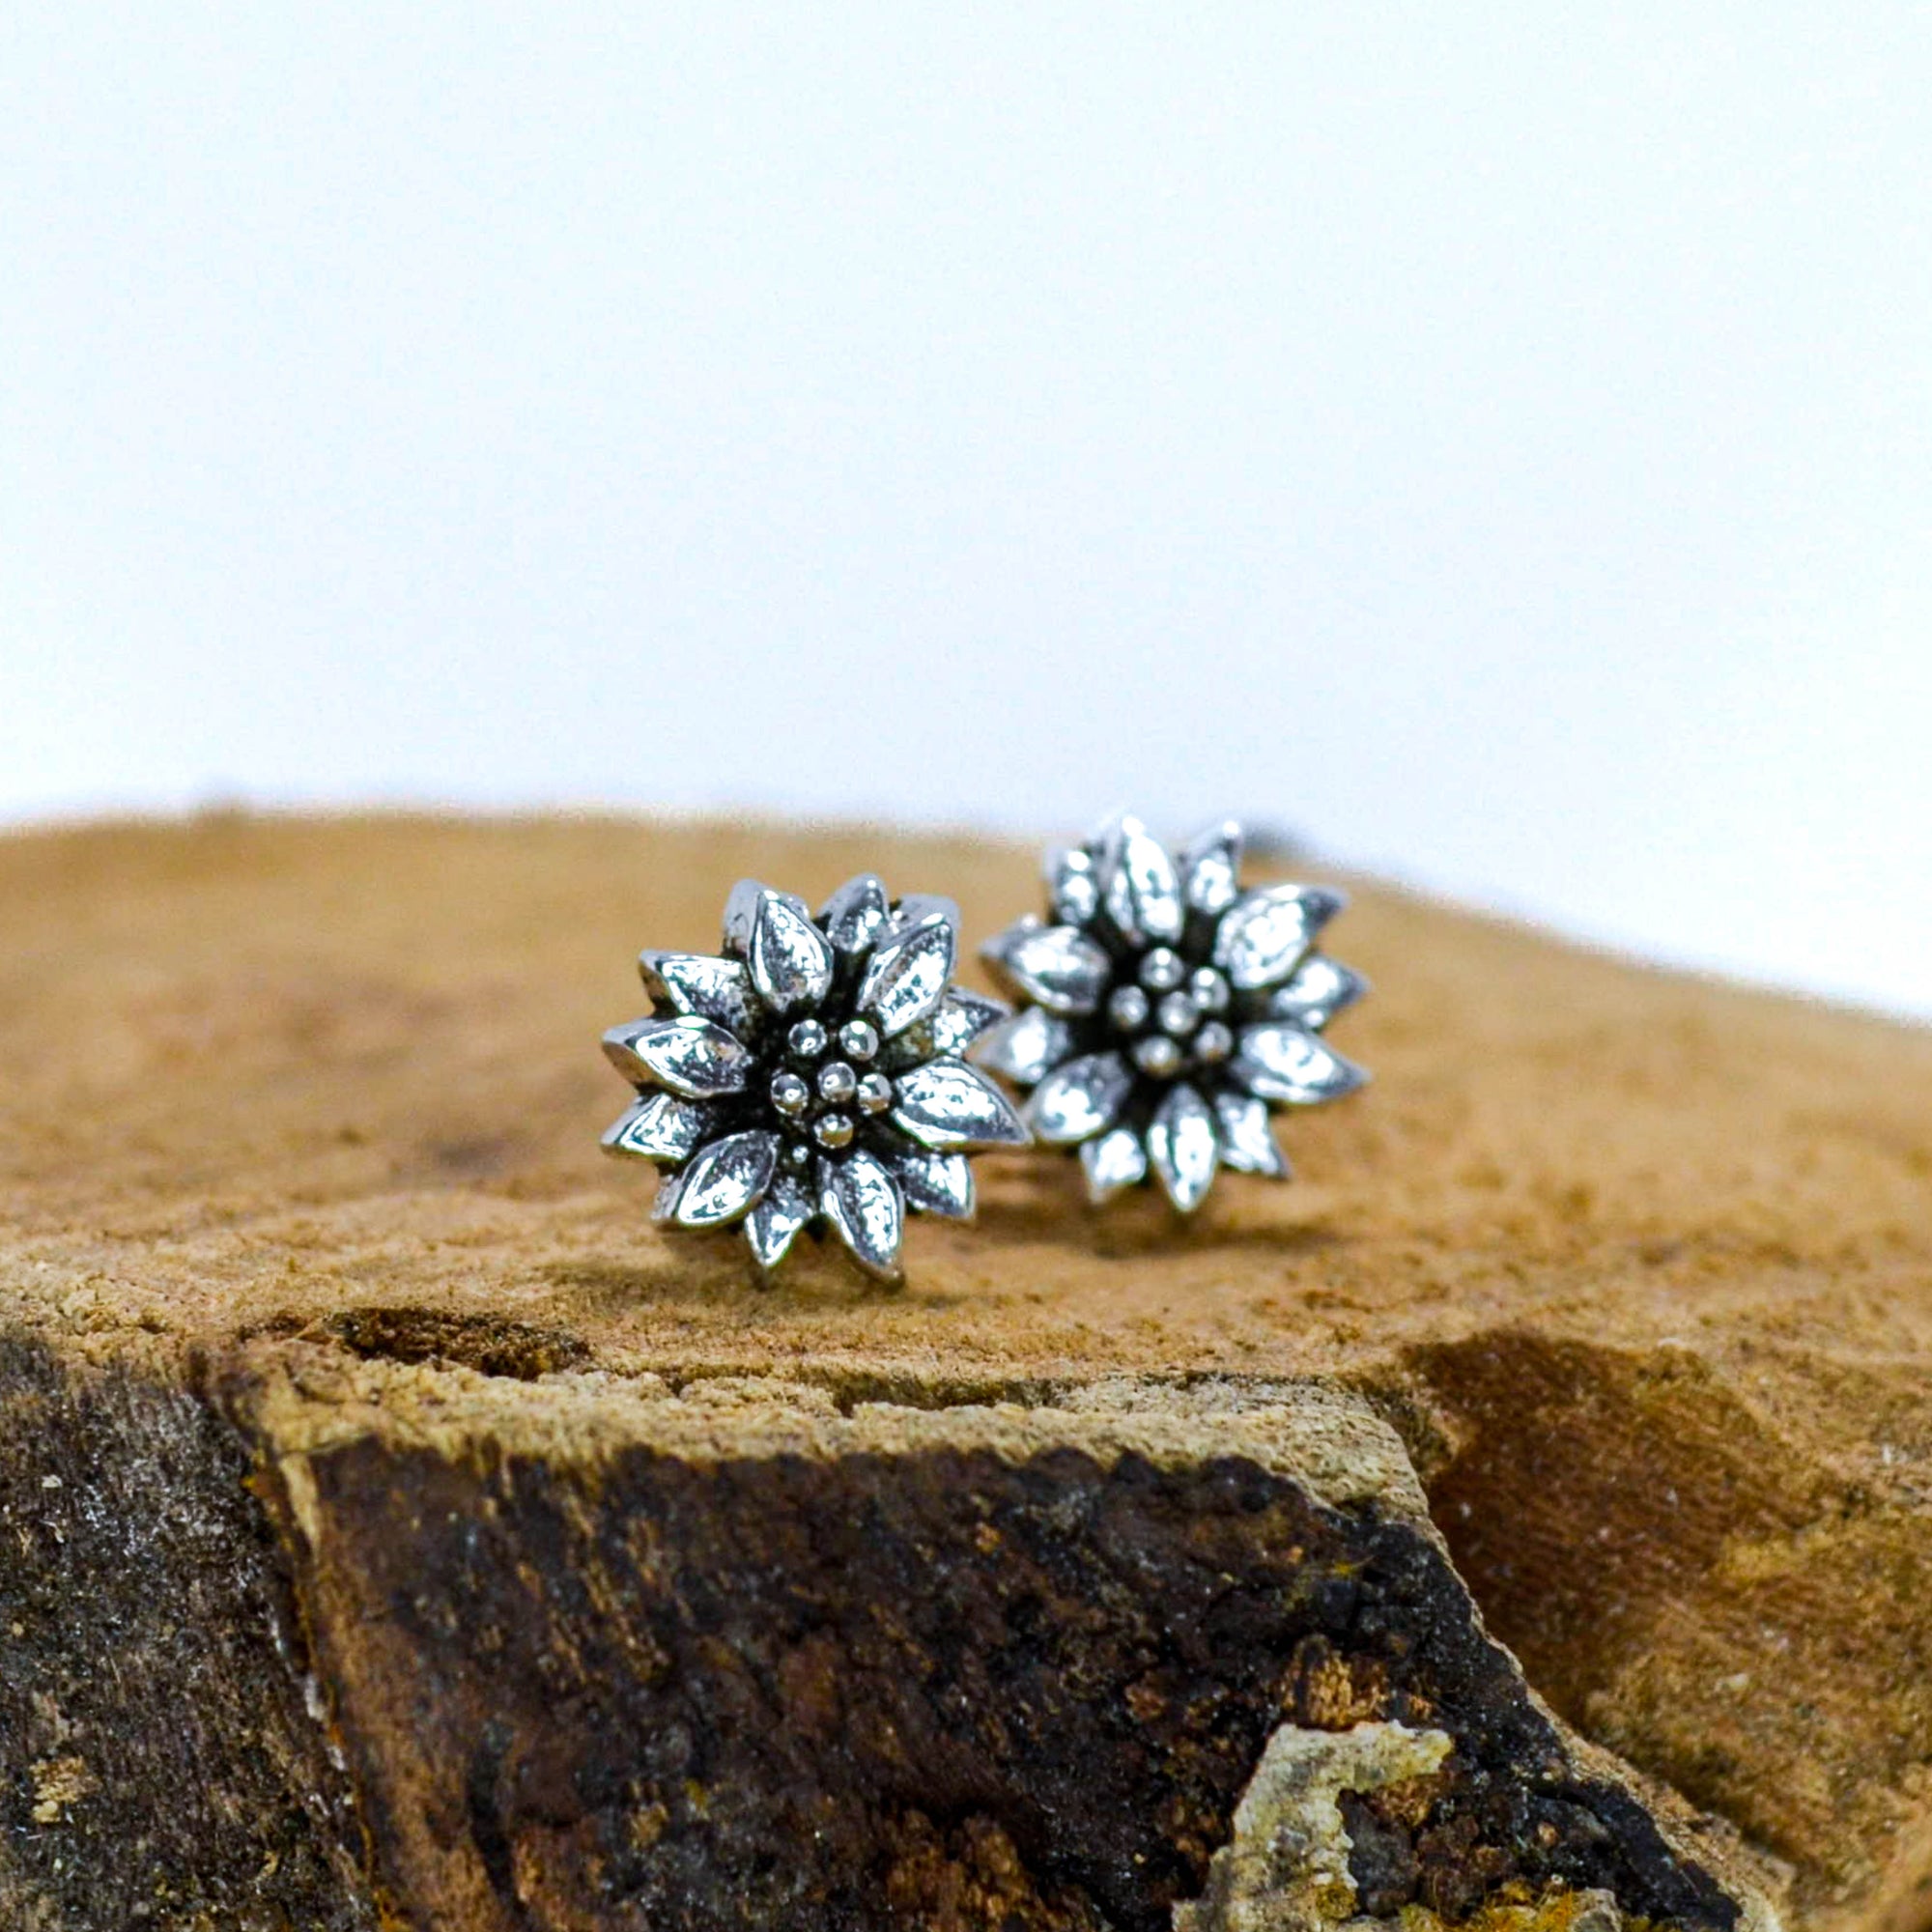 Small silver floral studs sitting on wood